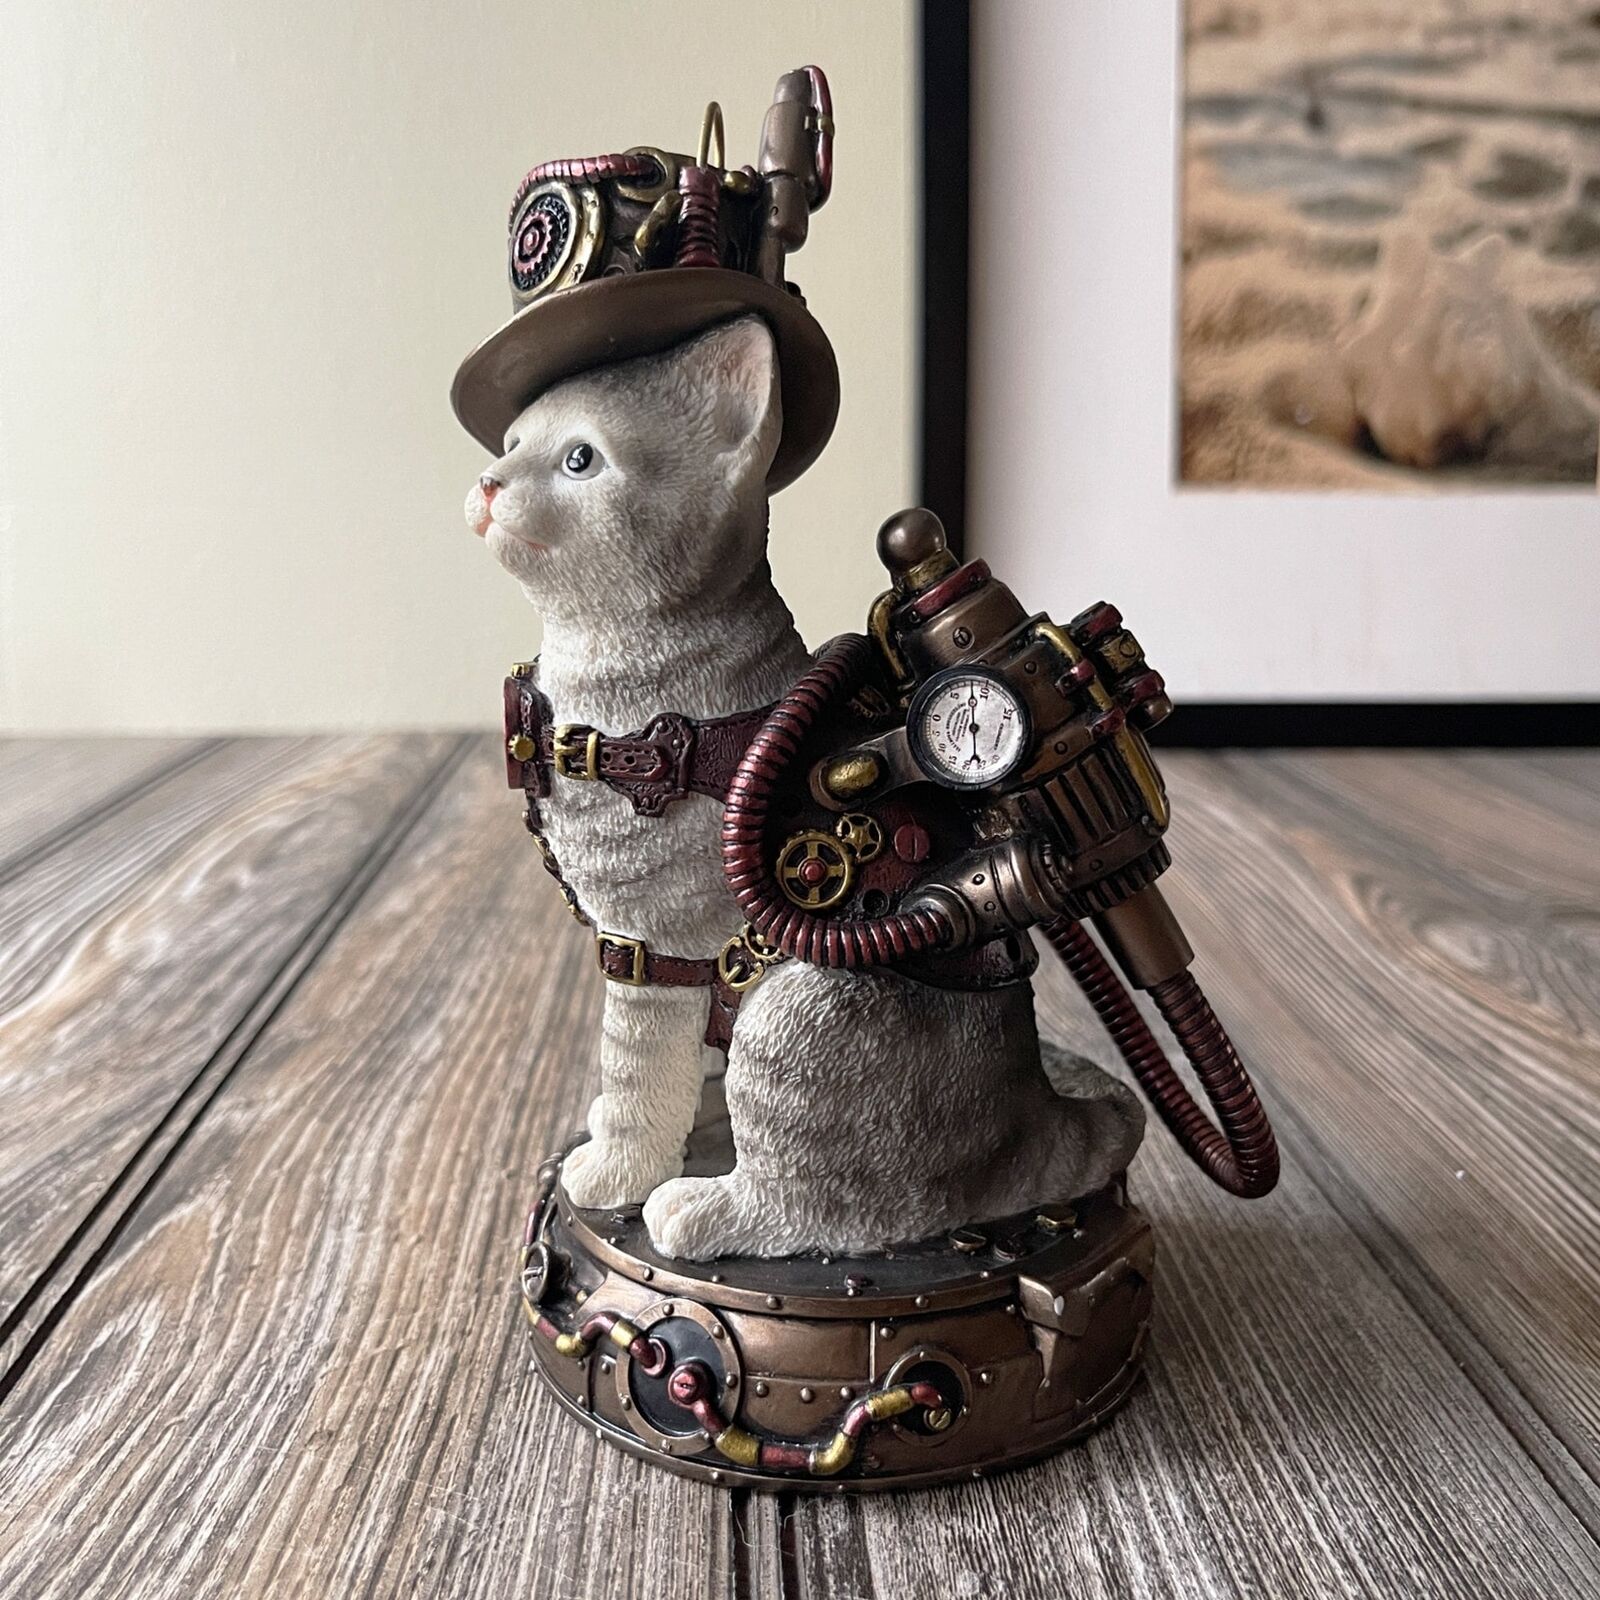 Handmade Steampunk Explorer Cat Figurine Statue with Top Hat and Compass